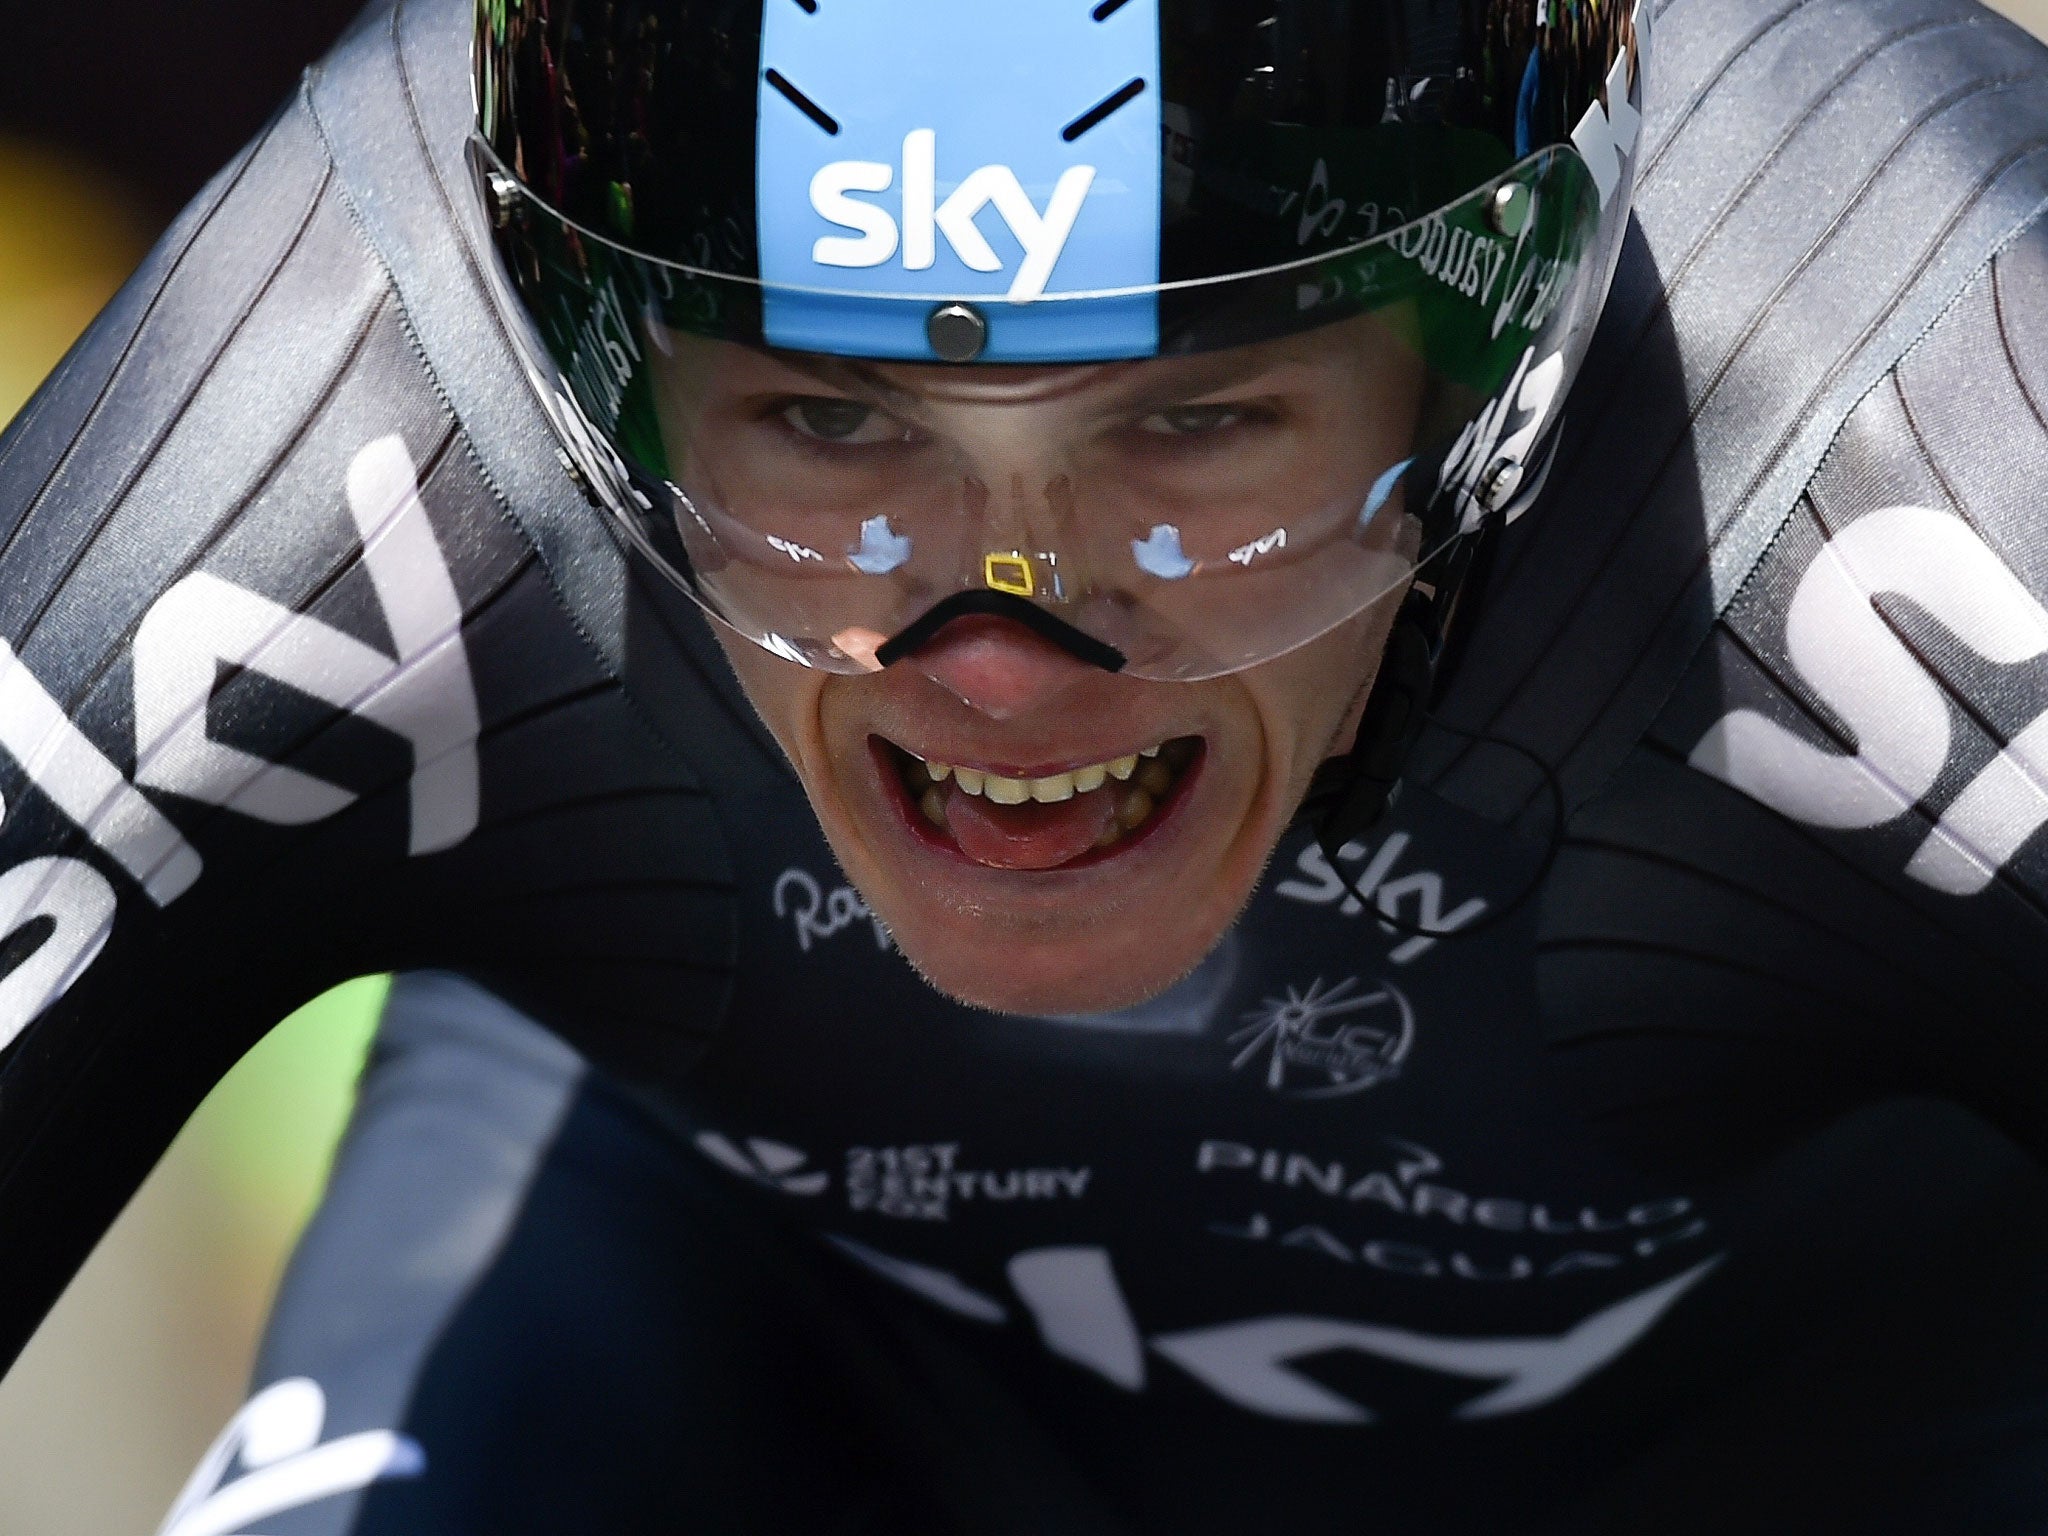 Chris Froome competes in the final stage of the Tour of Romandie on Sunday